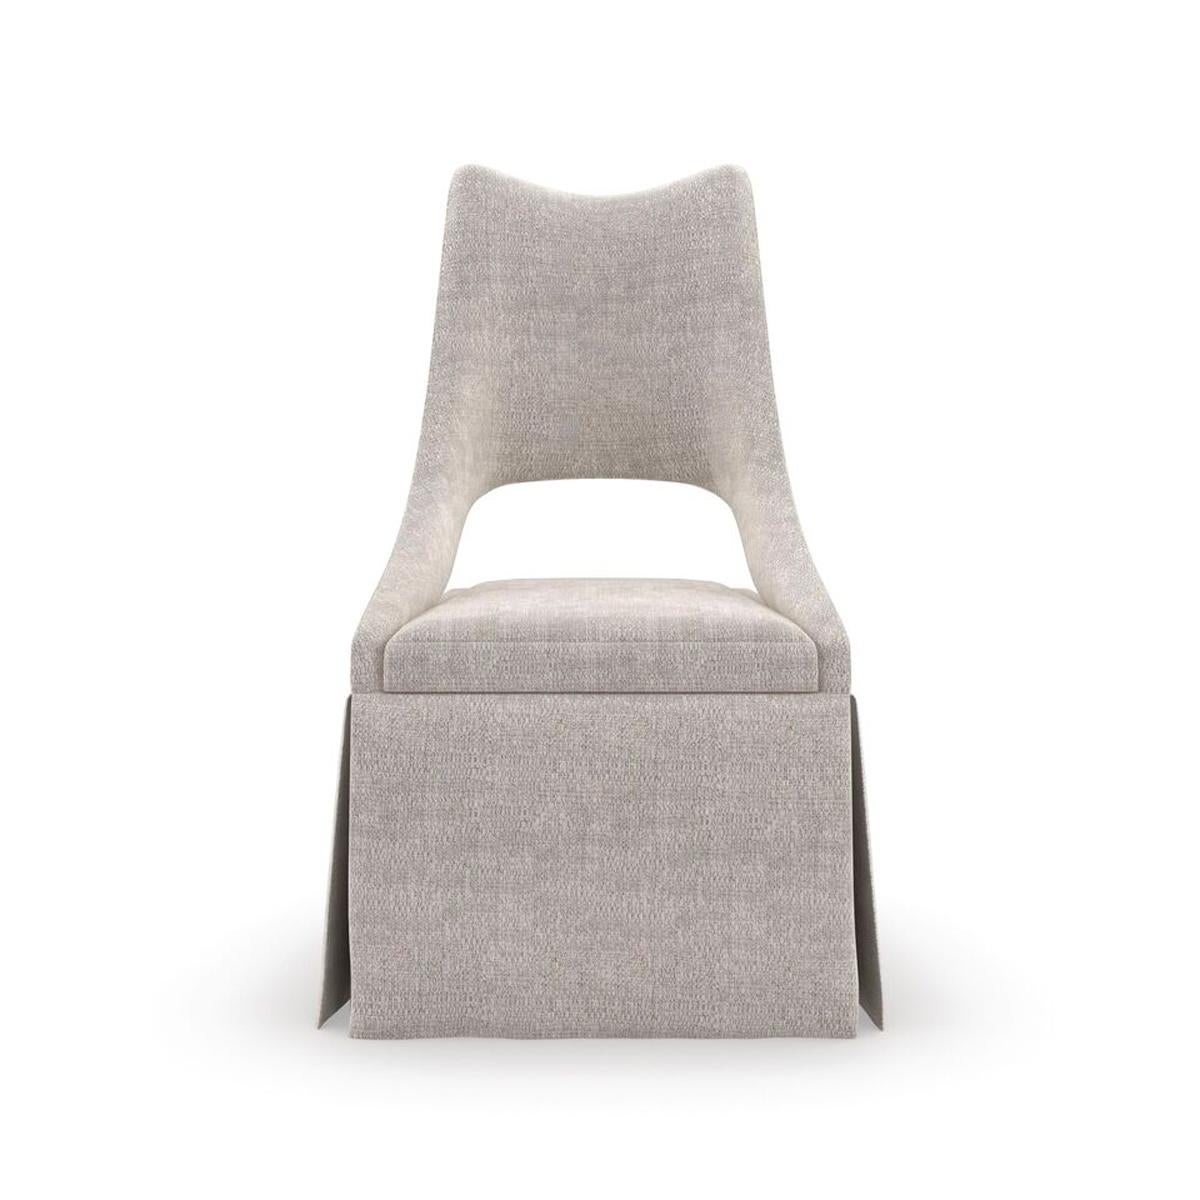 Dressed in a softly textured chenille performance fabric with a silver metallic ground, this elegant tall back chair works beautifully in home office spaces, or bedrooms and dressing areas. For a classic touch: a crisply tailored waterfall skirt